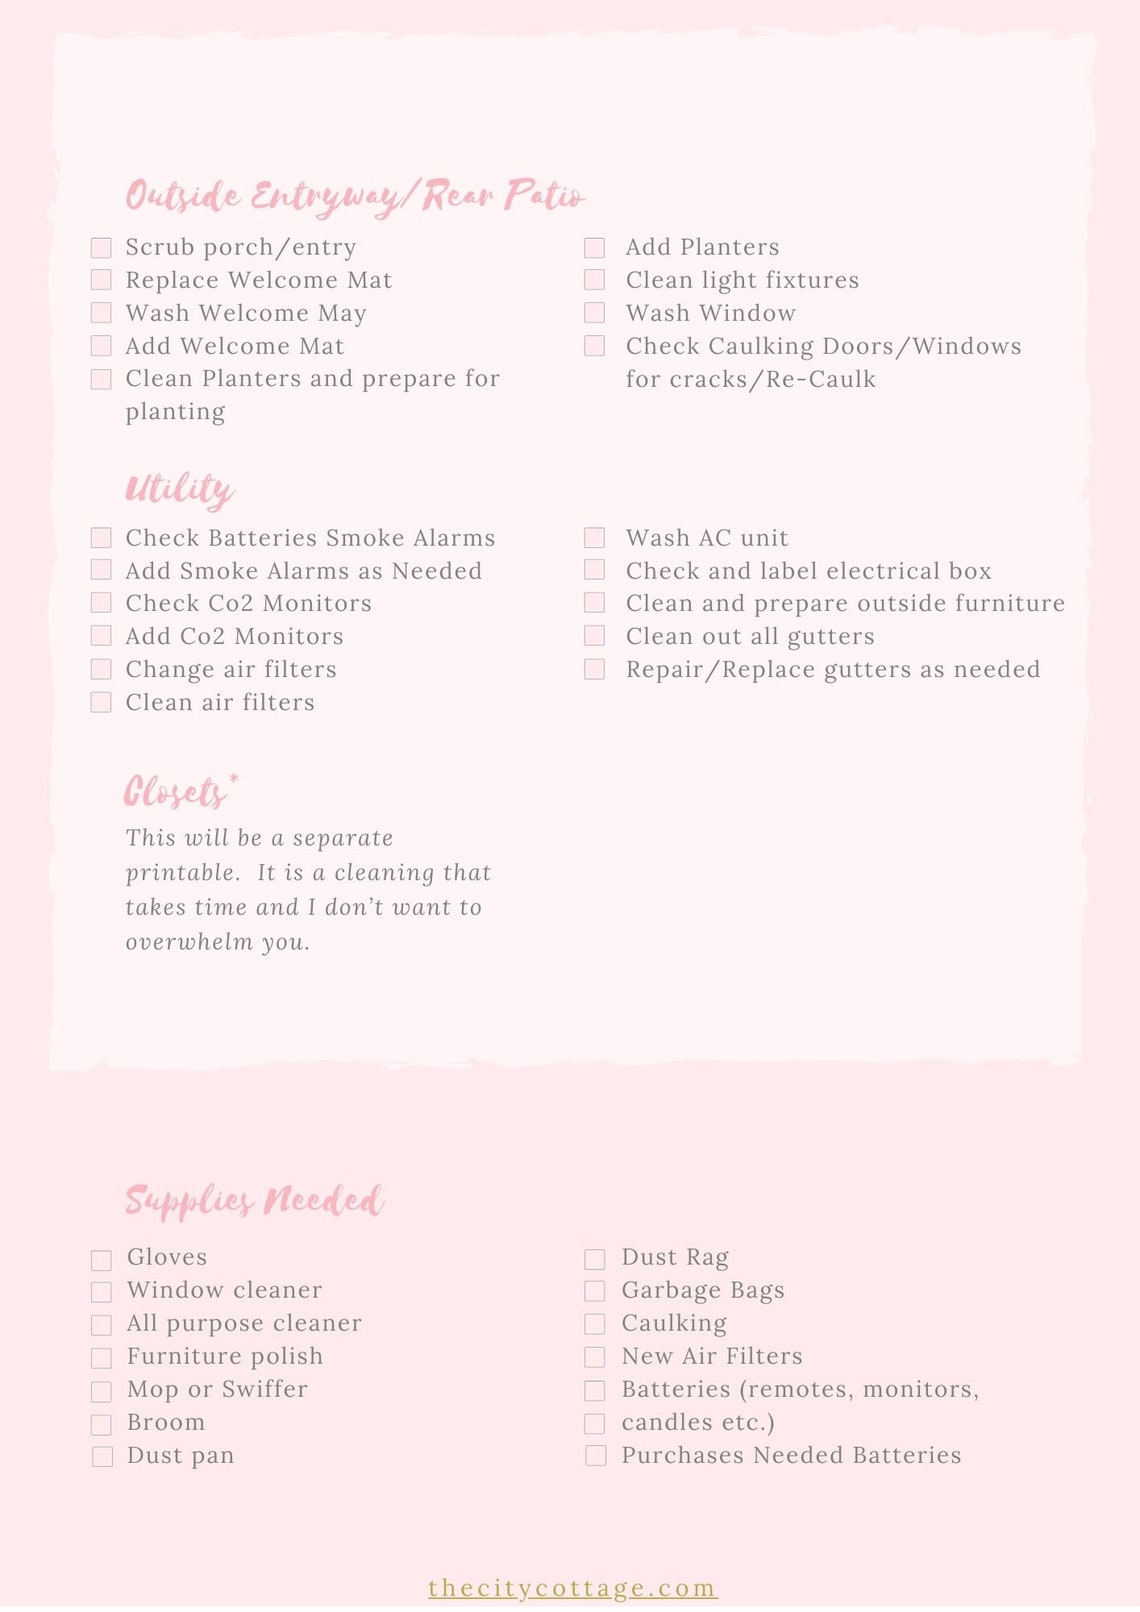 Spring Cleaning Checklist Checklist Printable Cleaning - Etsy